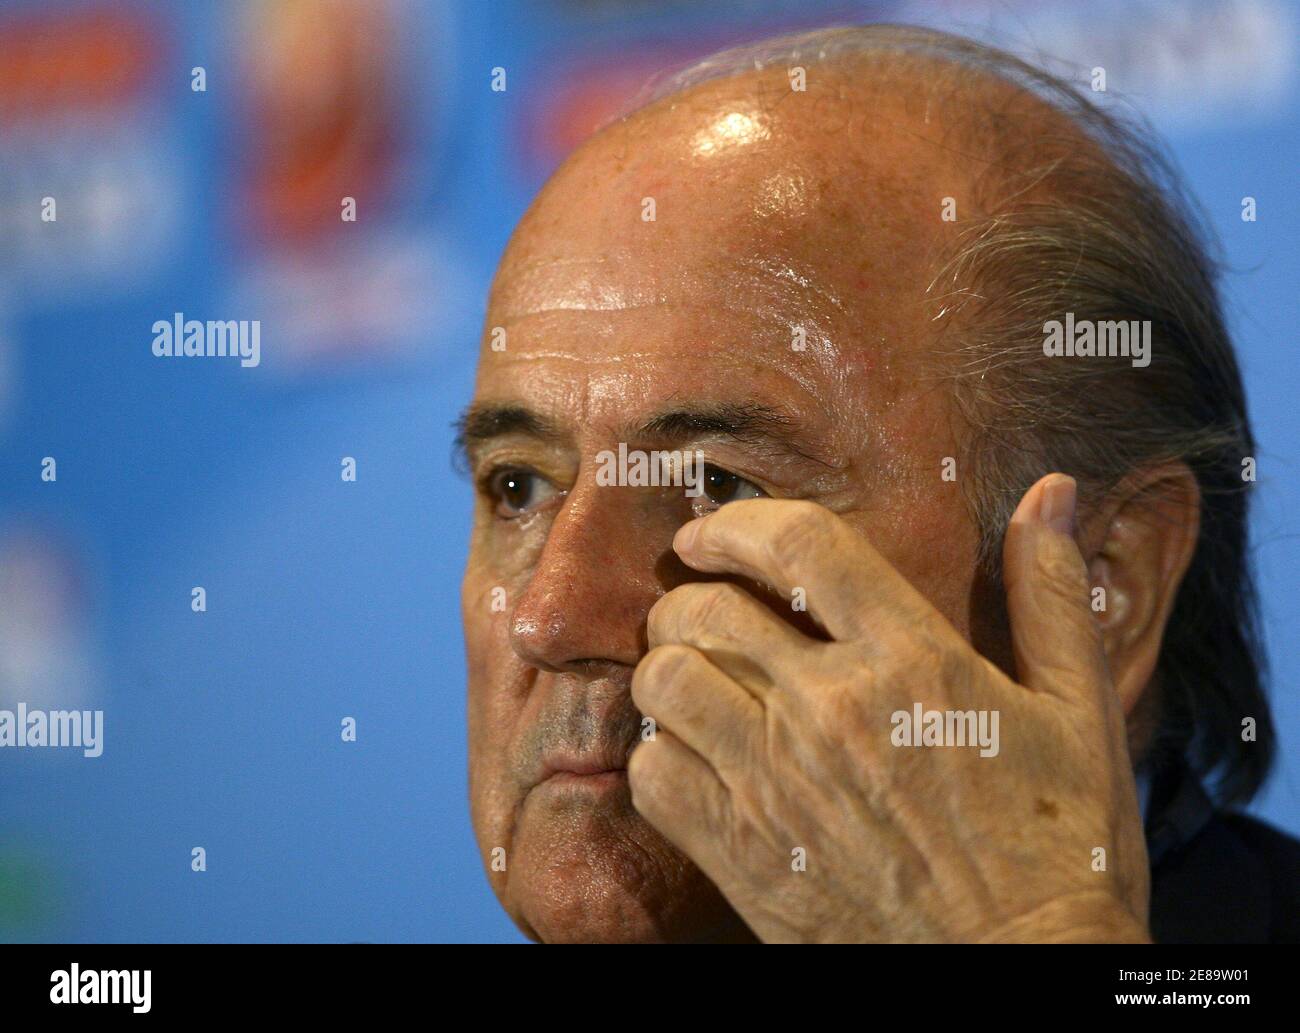 FIFA President Sepp Blatter holds a news conference, ahead of the FIFA Club World Cup final soccer match on Saturday, in Abu Dhabi December 17, 2009. REUTERS/Fahad Shadeed (UNITED ARAB EMIRATES - Tags: SPORT SOCCER HEADSHOT) Stock Photo